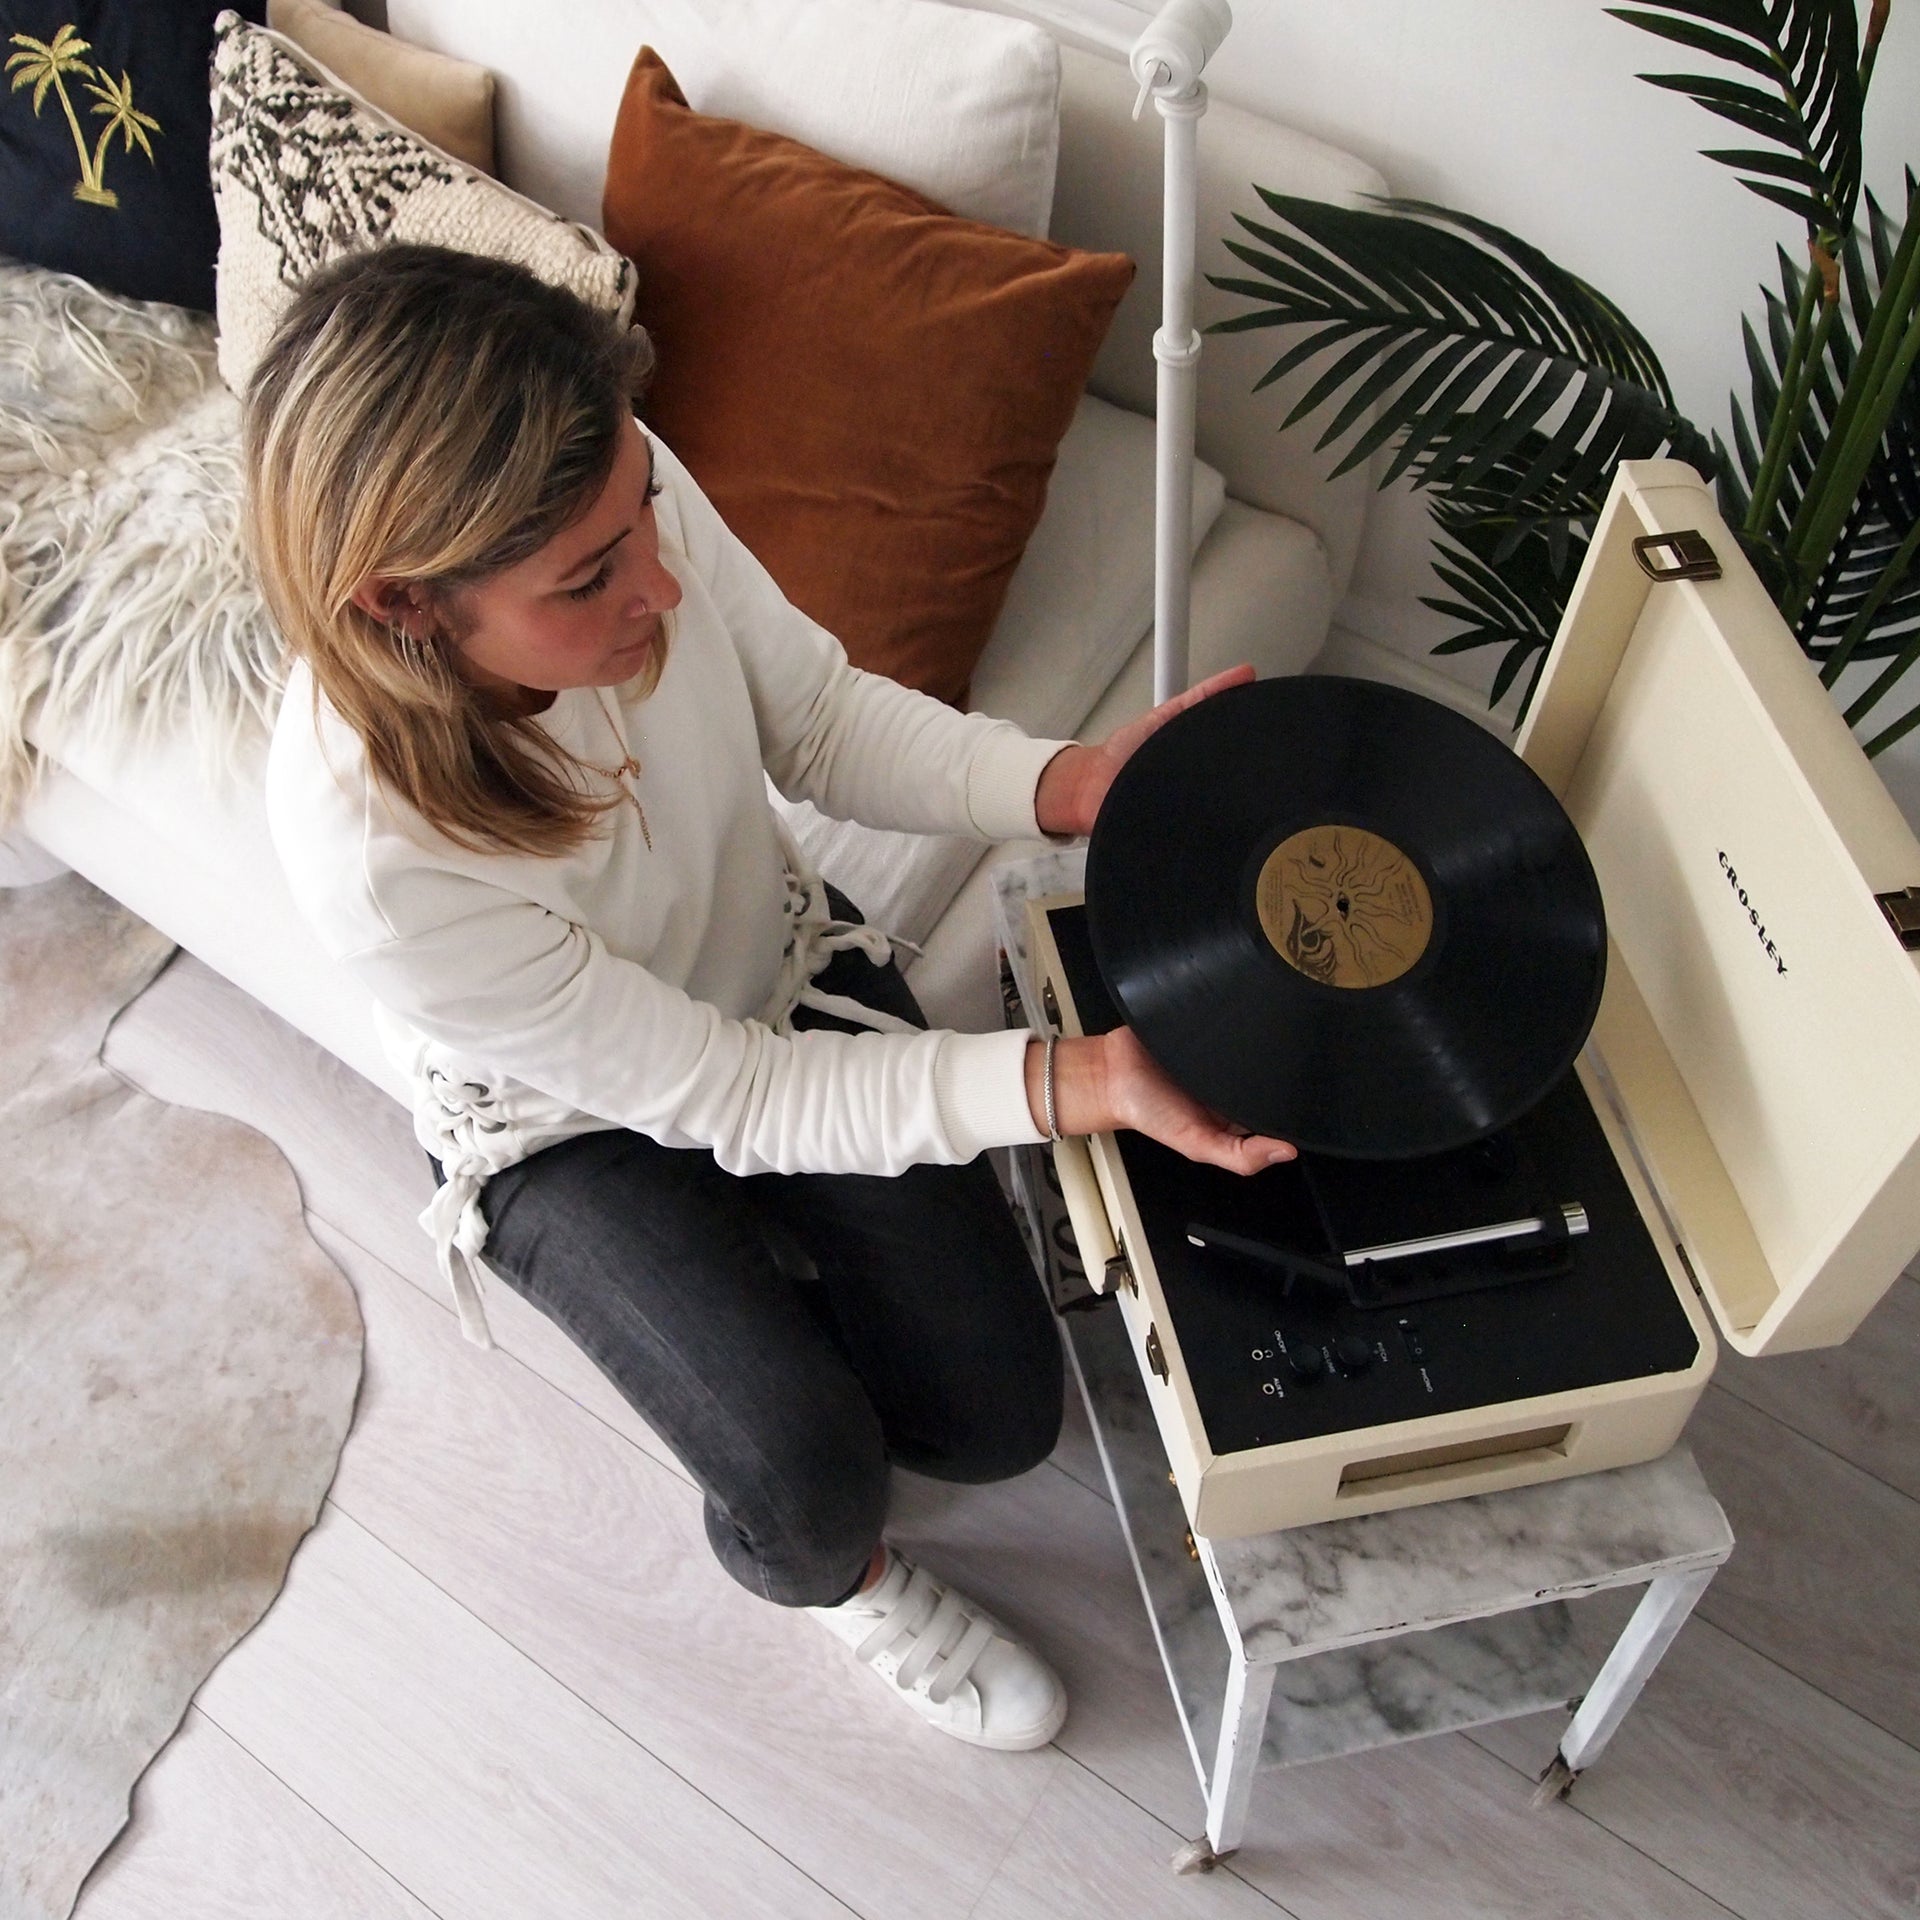 Vinyl Culture | Shannah and her brother's record collection Crosley Radio Europe